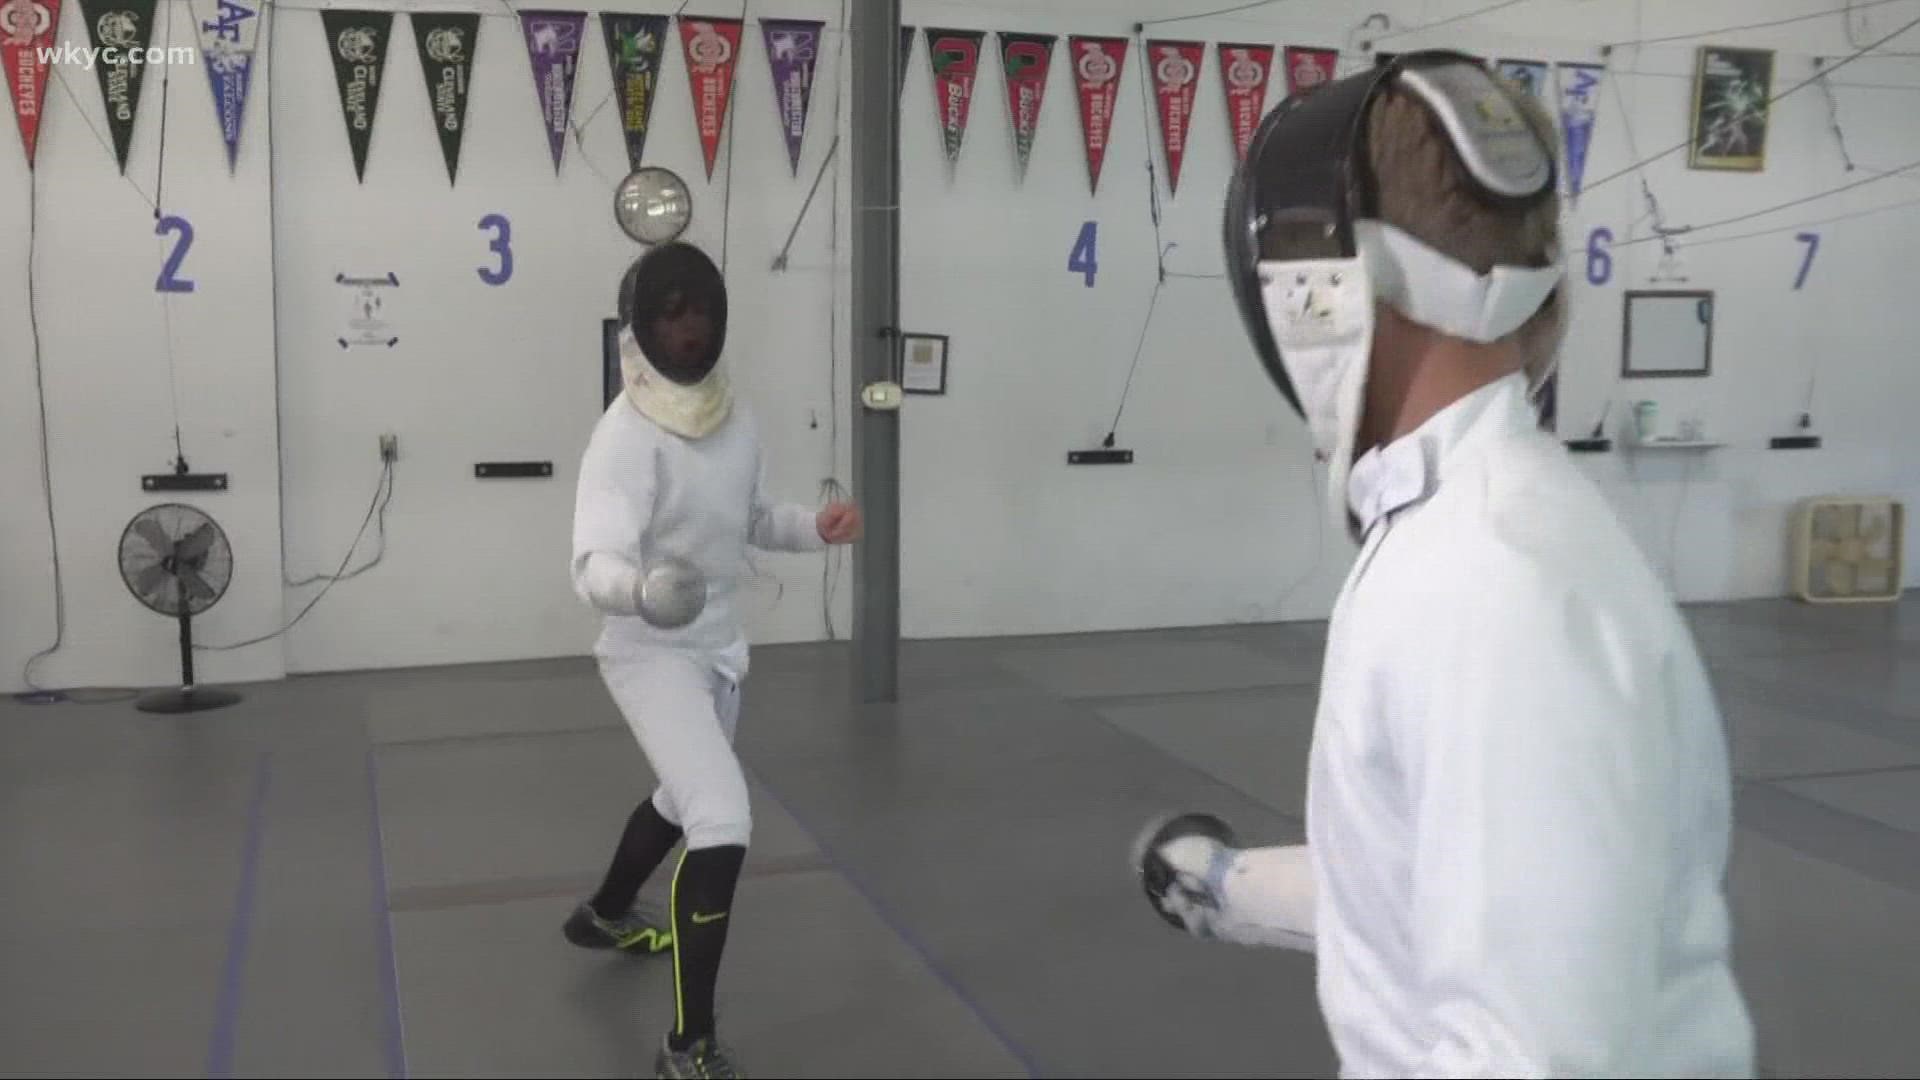 You simply have to see this. Our own Austin Love stepped up to learn how Olympics fencing works -- and he even went up against an experienced teen.